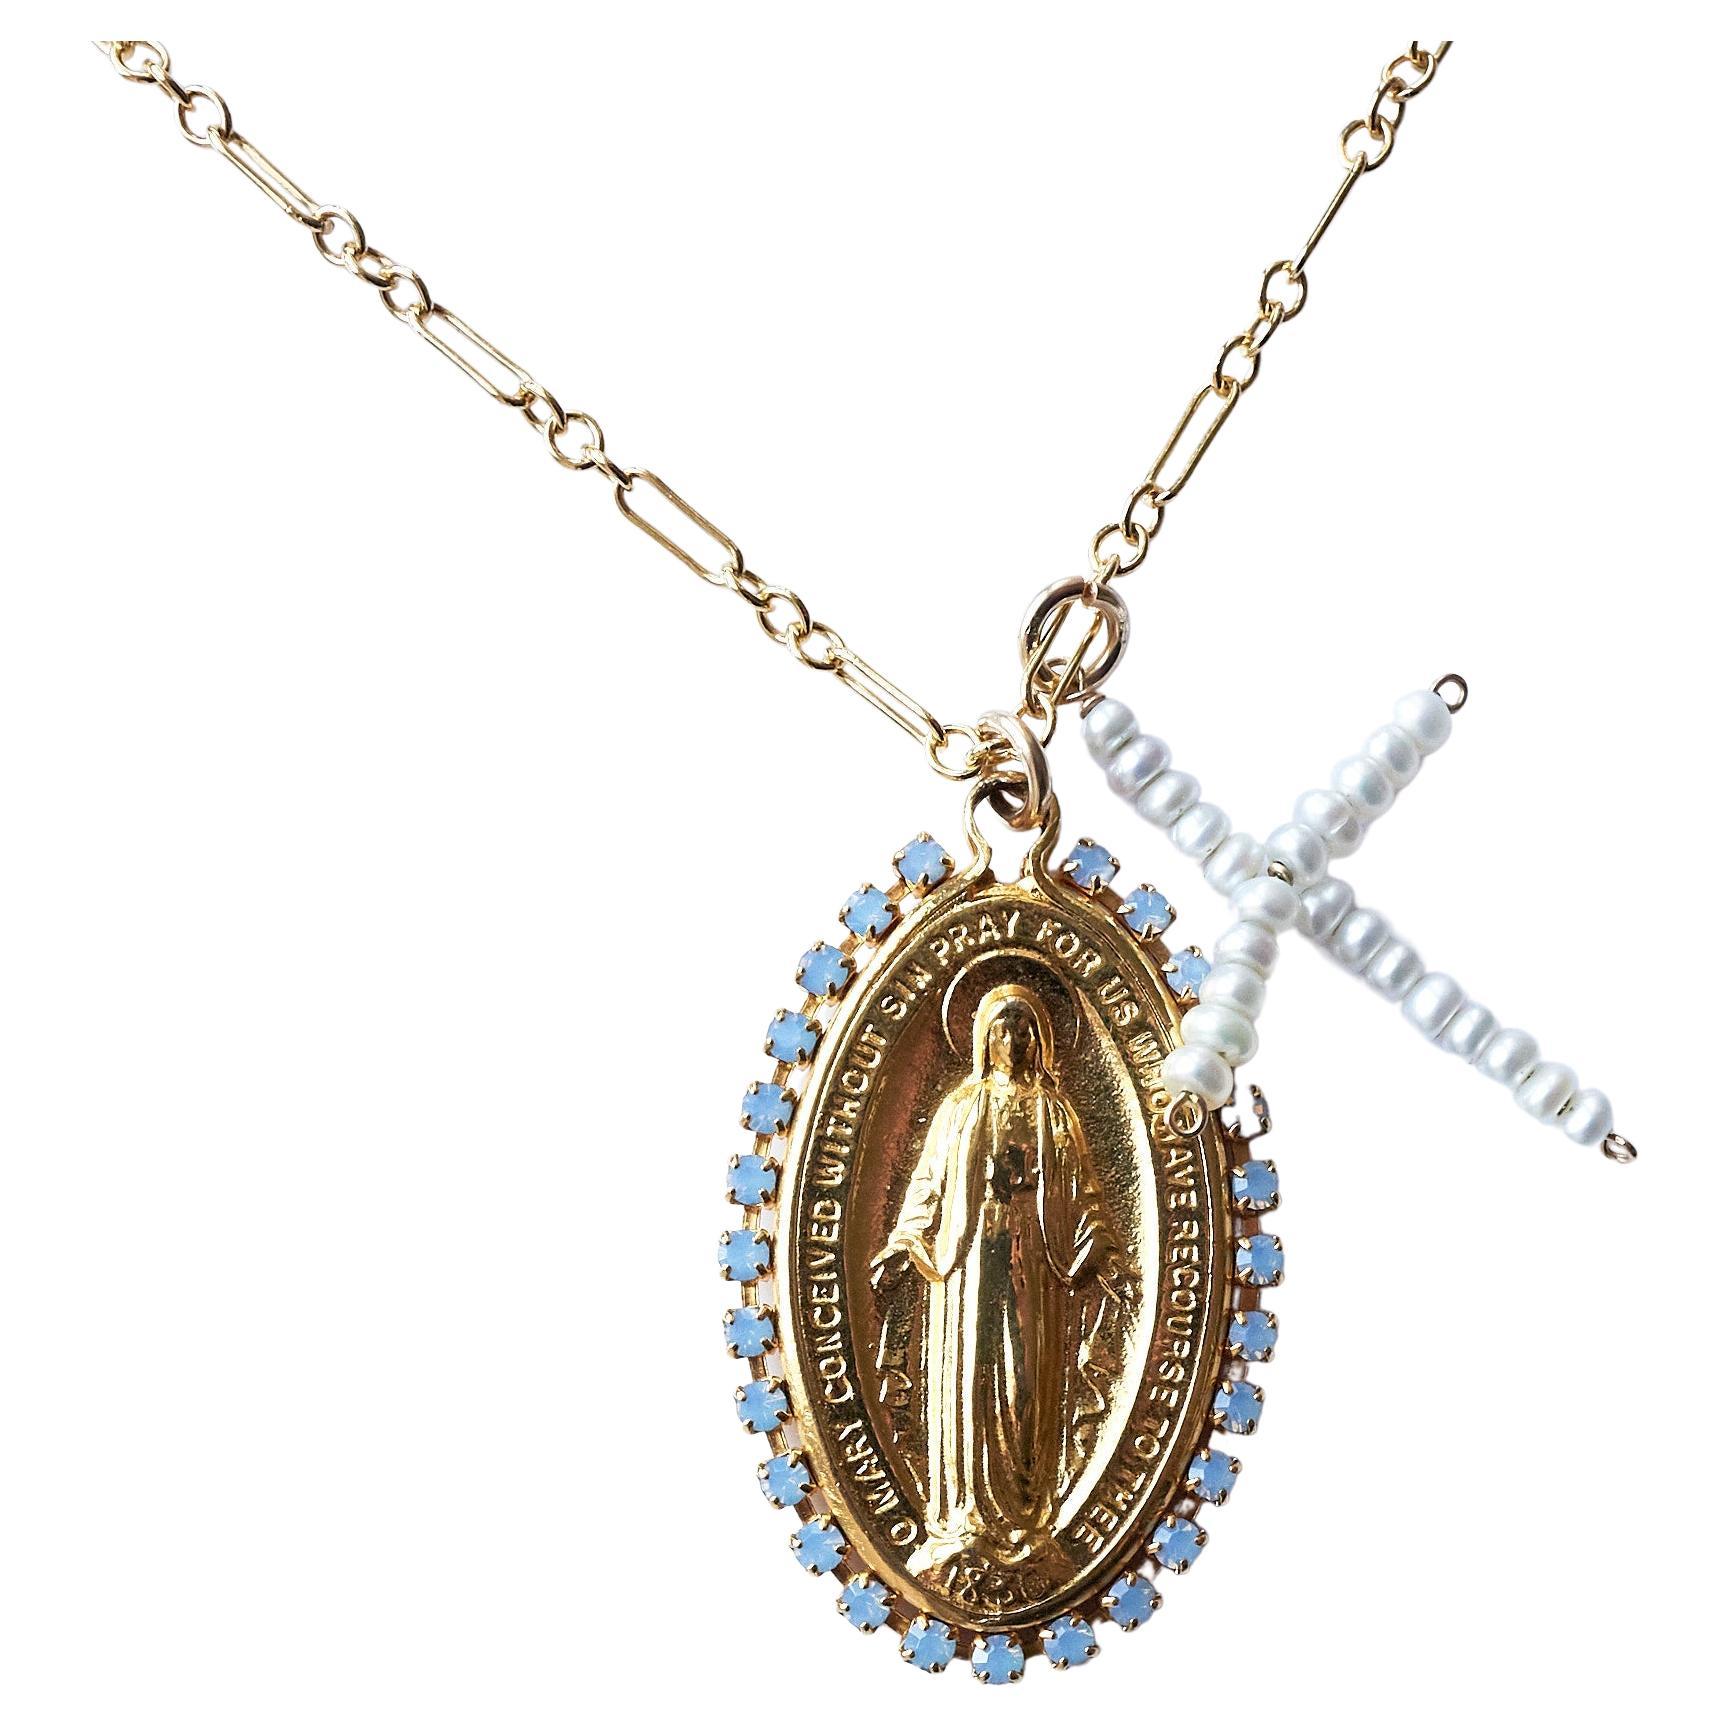 Virgin Mary Oval Medal White Pearl Cross Chain Necklace Light Blue Rhinestone For Sale